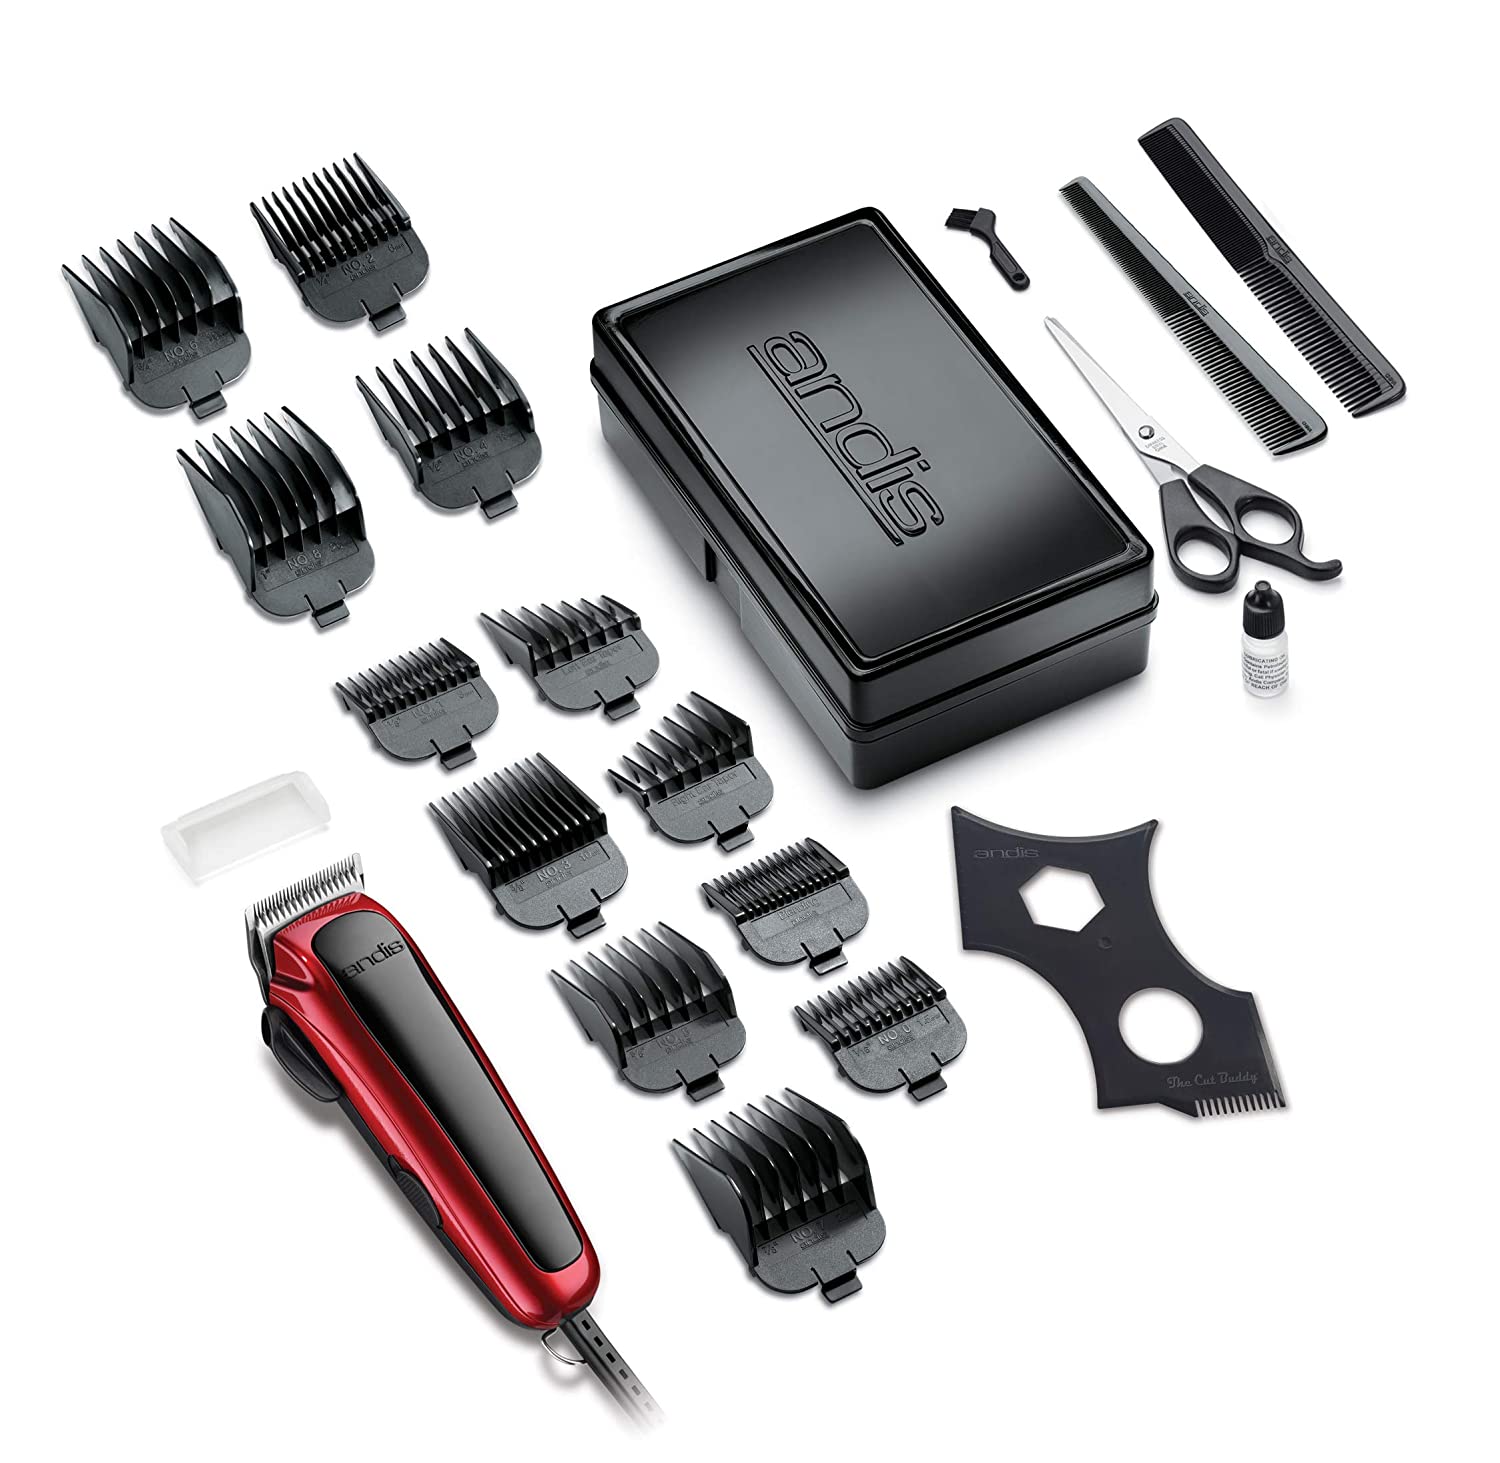 Andis 75360 Adjustable Blade Clipper Easy Cut 20-Piece Haircutting Kit, Red/Black